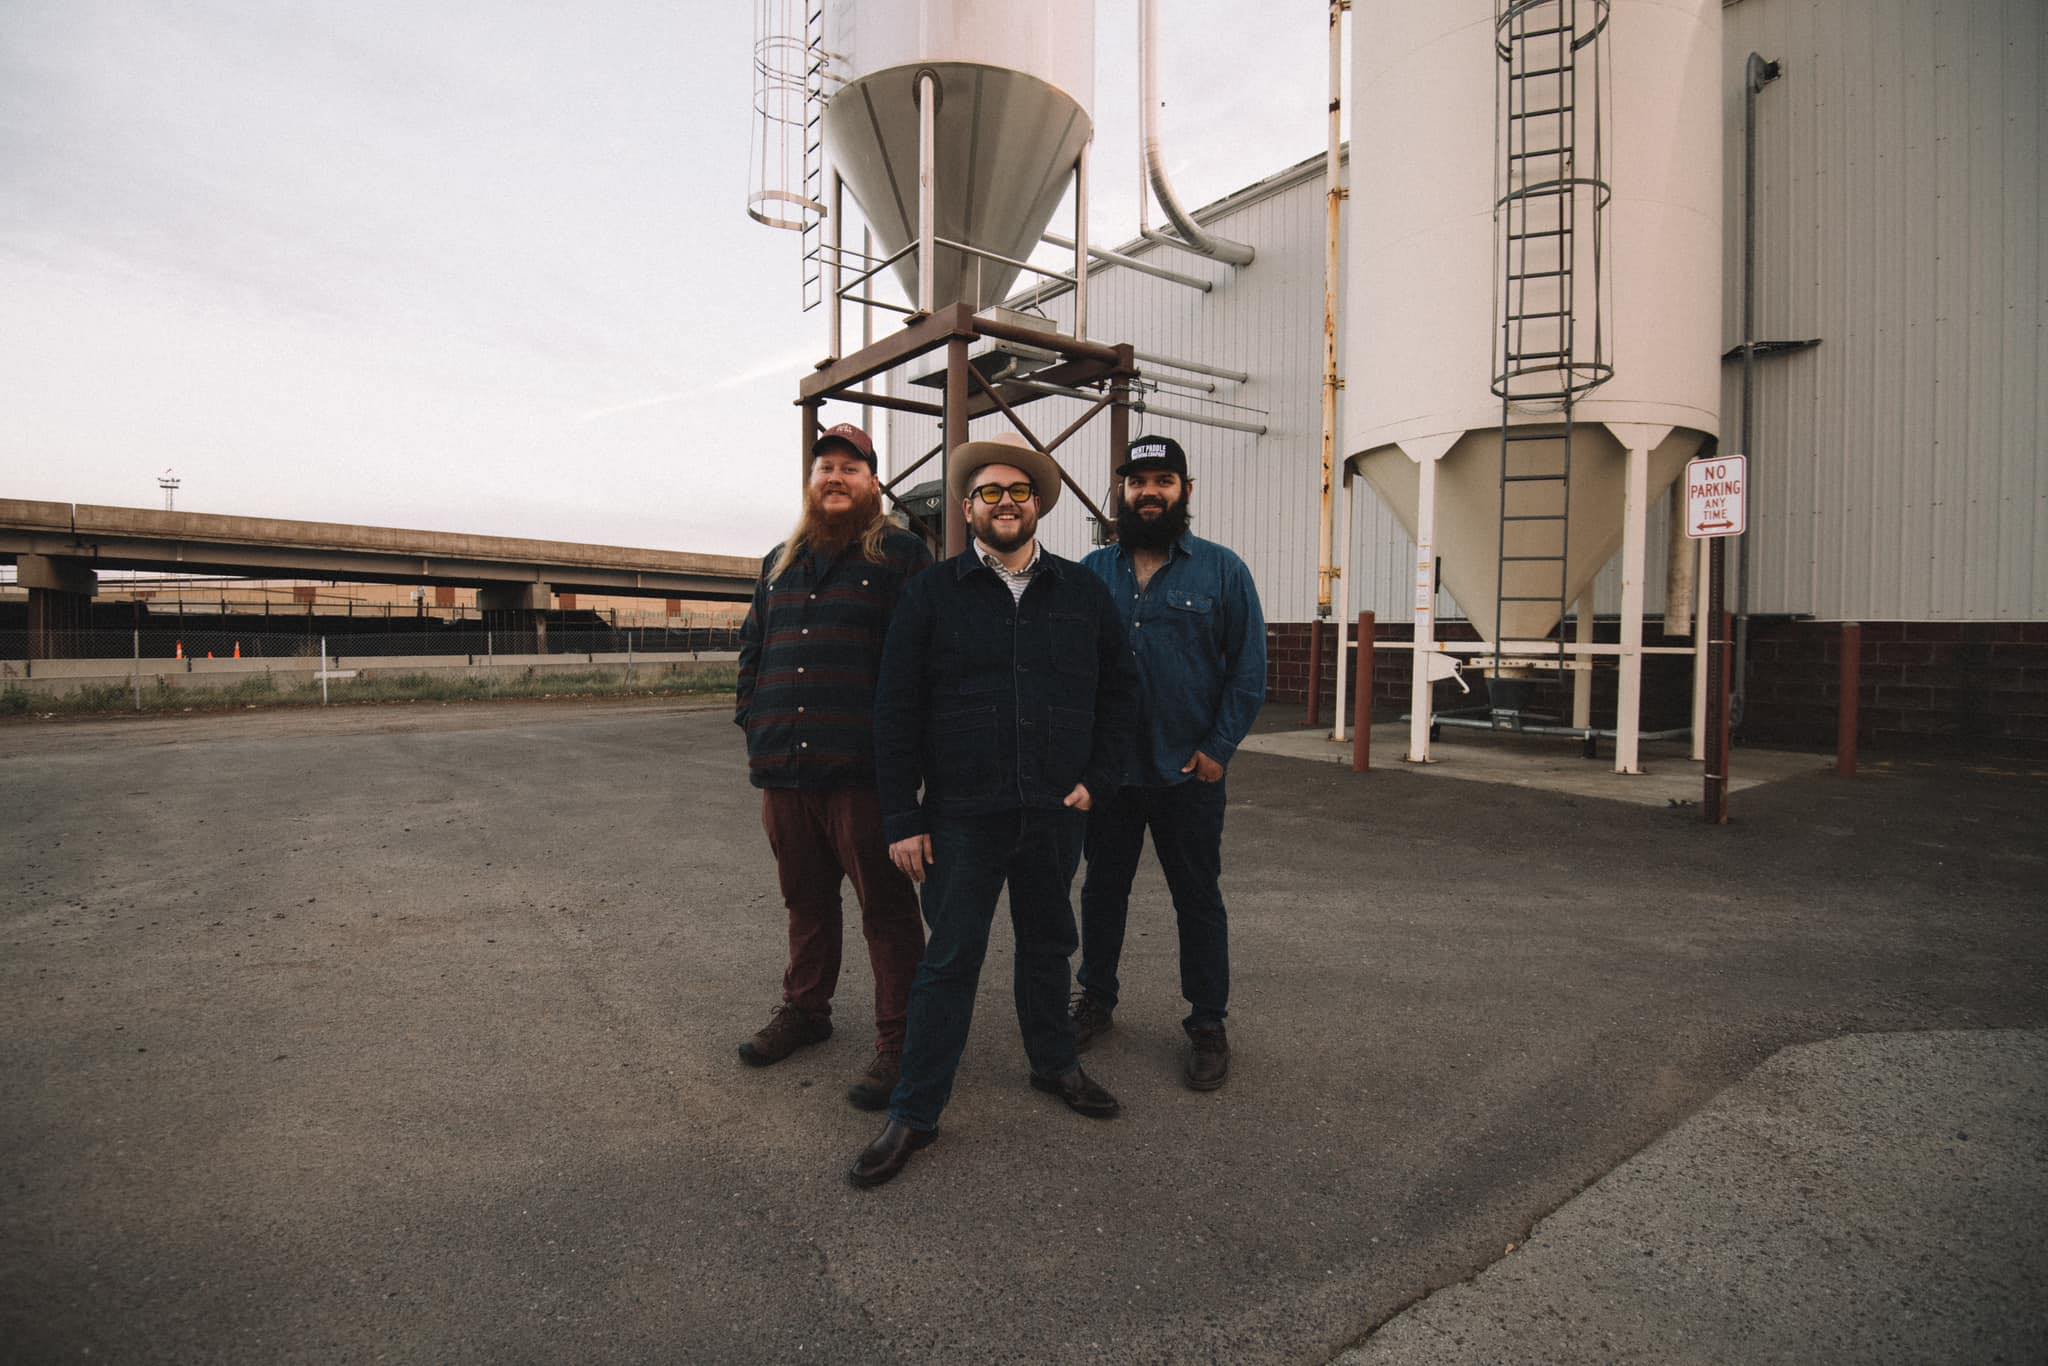 photo of the band Tres Osos in front of grain silos